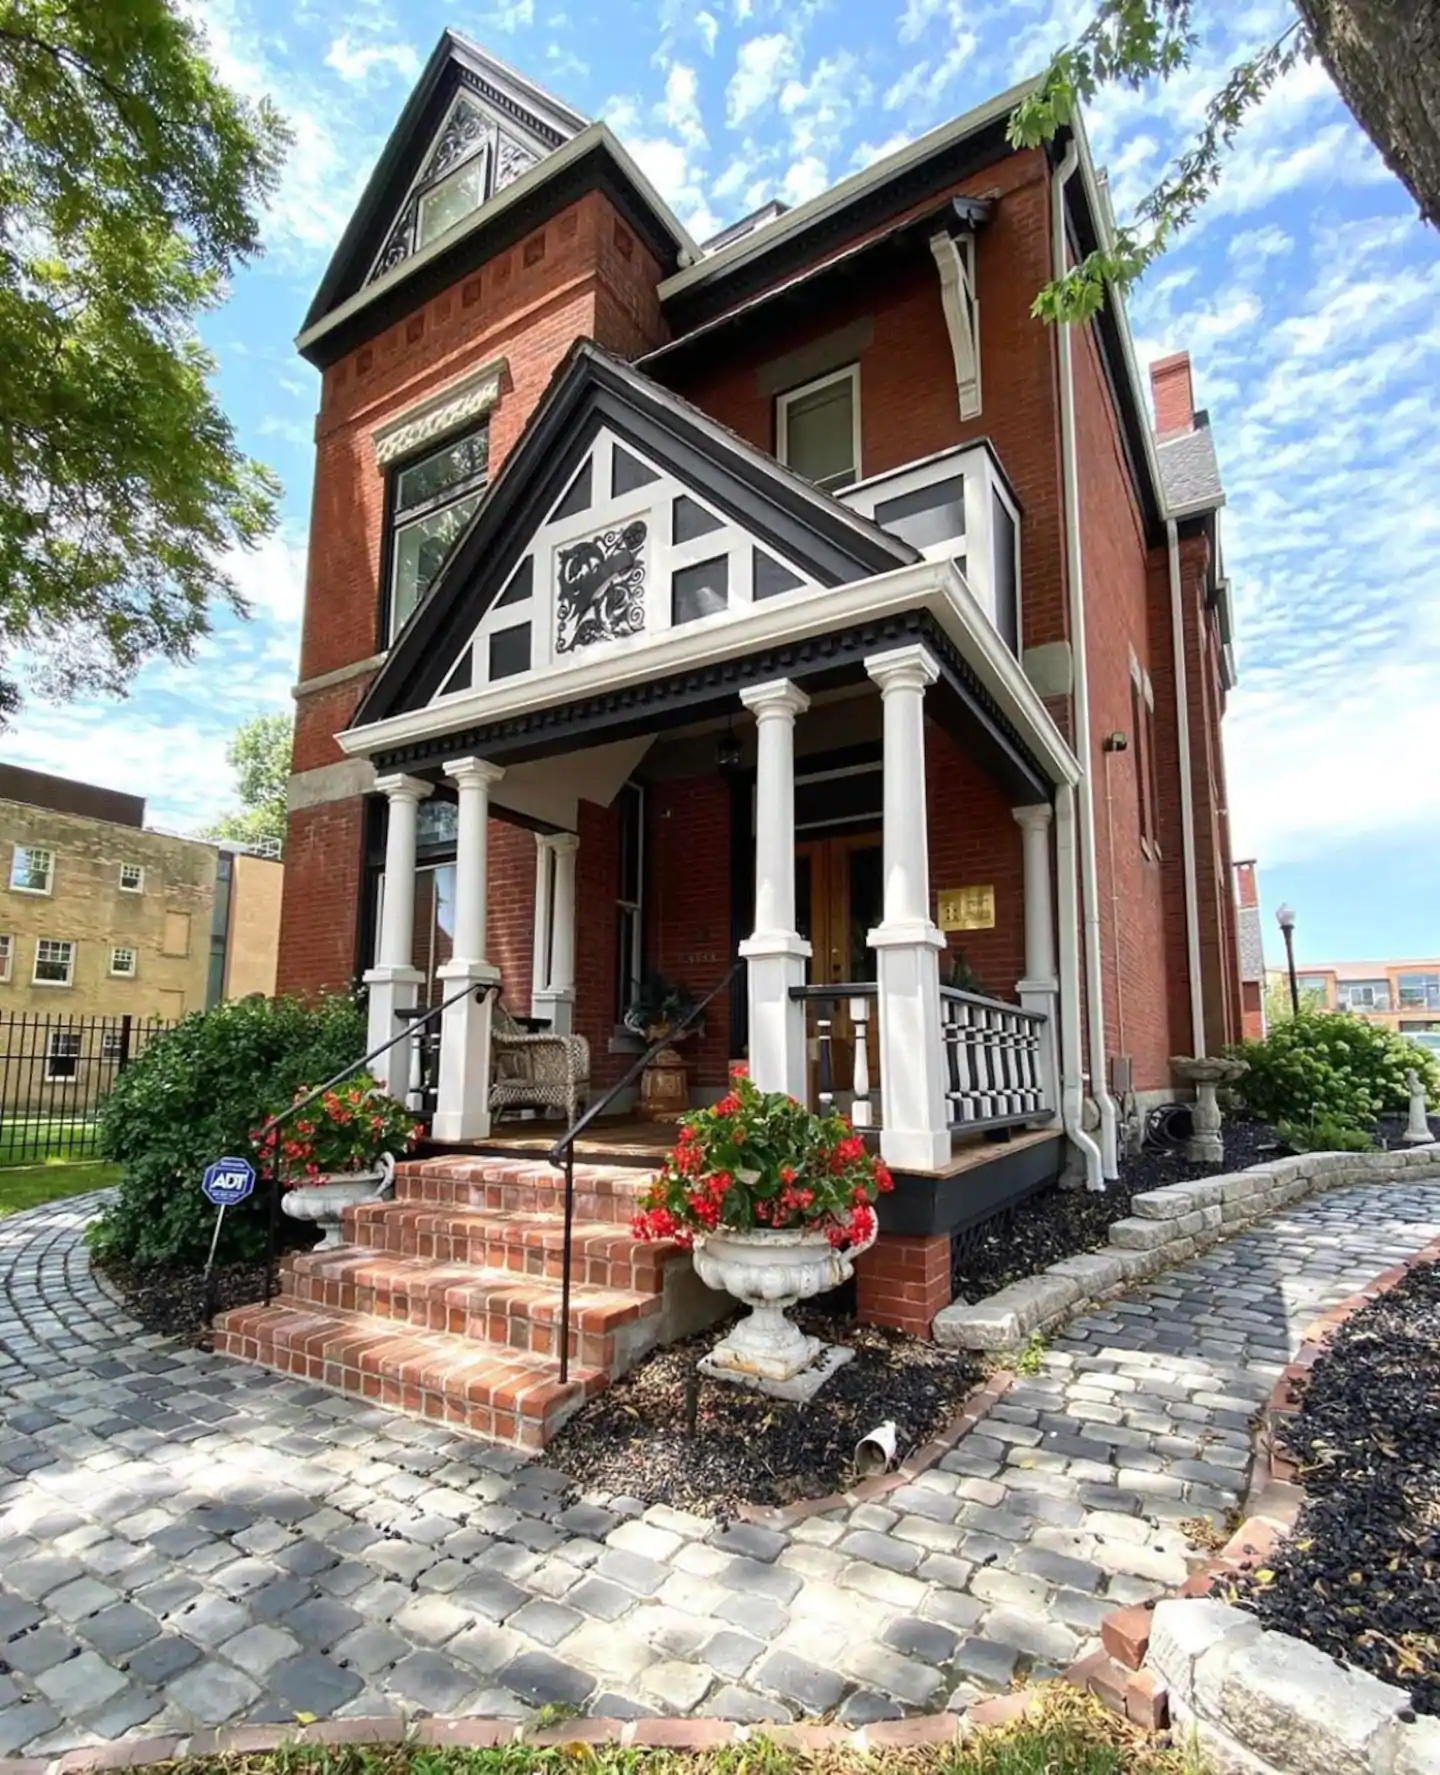 Historic three-story Queen Anne-style red brick home has beautiful white columns